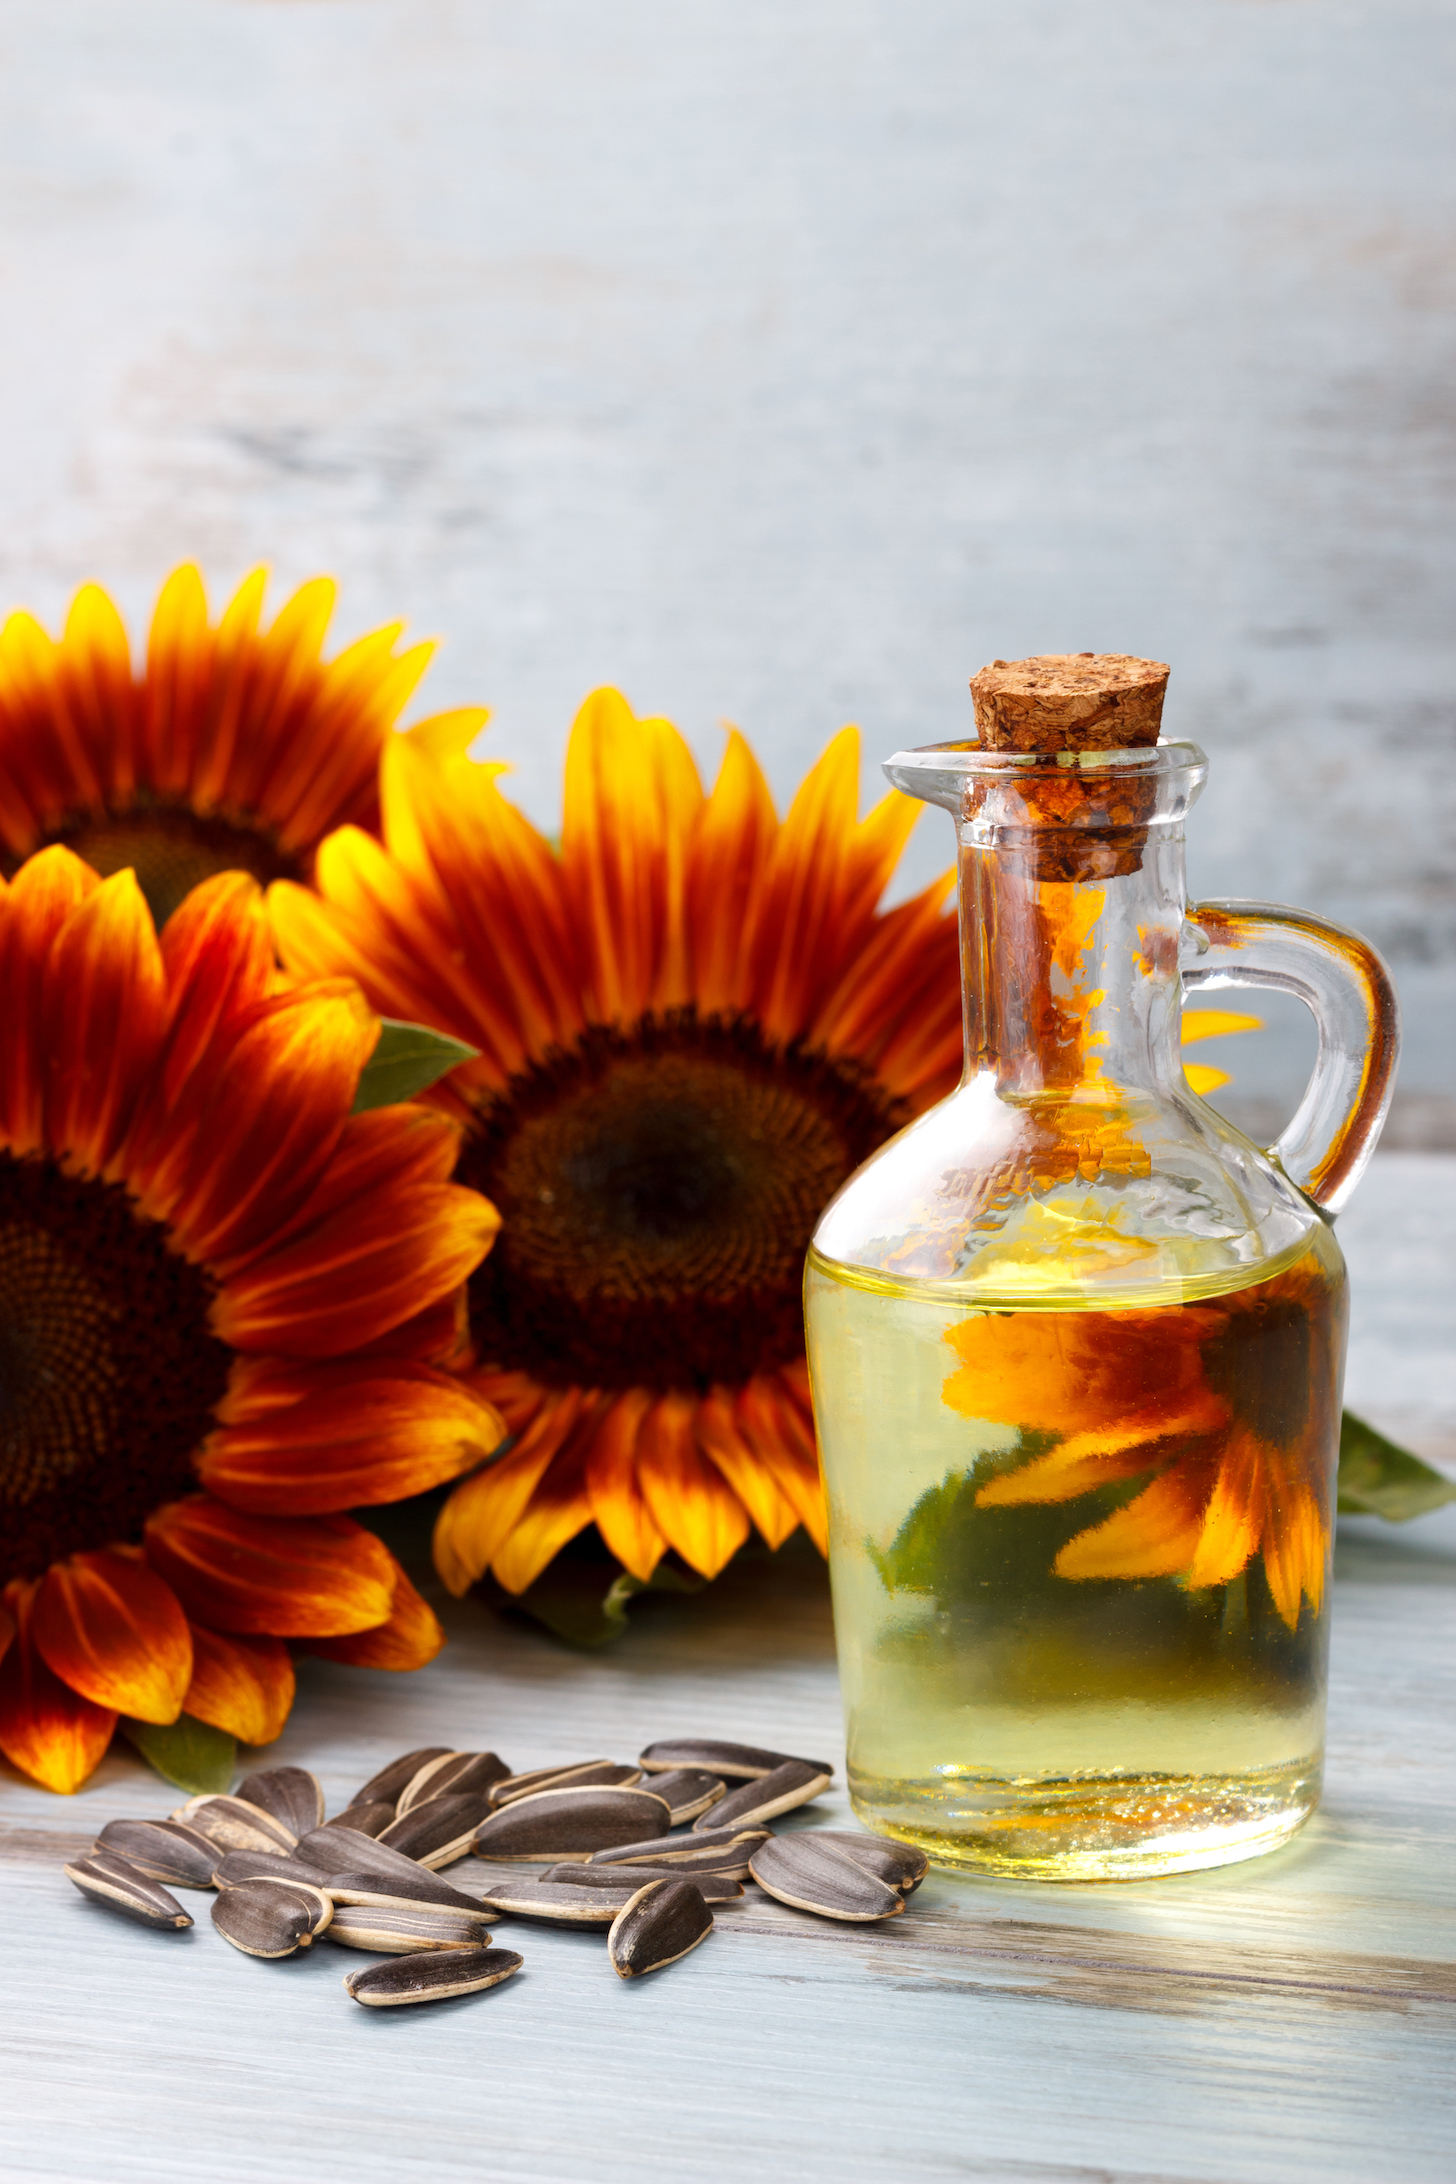 Sunflower Oil with seeds on vintage wooden background